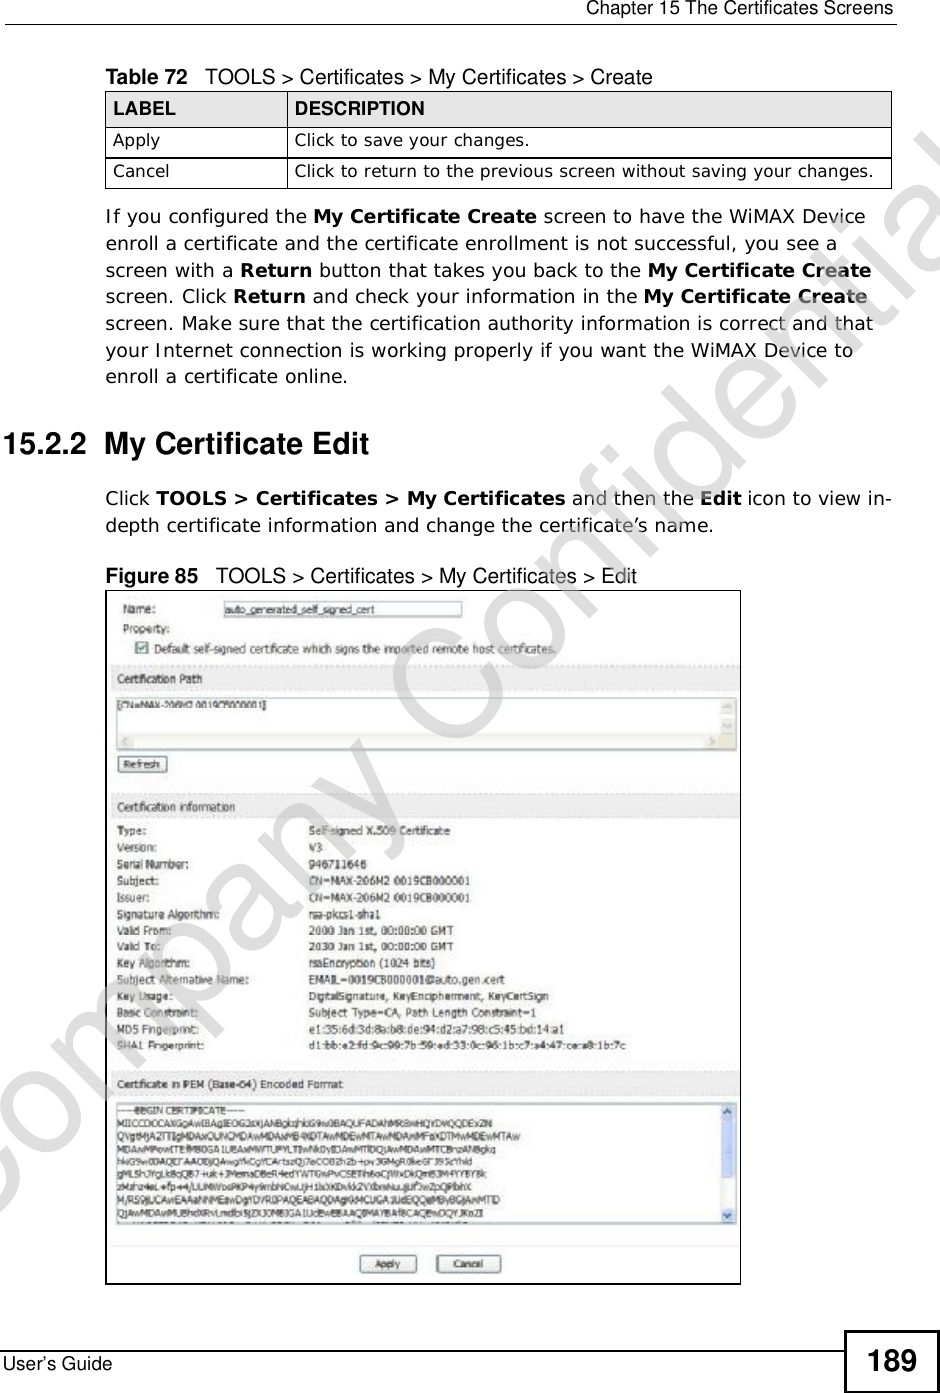  Chapter 15The Certificates ScreensUser’s Guide 189If you configured the My Certificate Create screen to have the WiMAX Device enroll a certificate and the certificate enrollment is not successful, you see a screen with a Return button that takes you back to the My Certificate Createscreen. Click Return and check your information in the My Certificate Createscreen. Make sure that the certification authority information is correct and that your Internet connection is working properly if you want the WiMAX Device to enroll a certificate online.15.2.2  My Certificate EditClick TOOLS &gt; Certificates &gt; My Certificates and then the Edit iconto view in-depth certificate information and change the certificate’s name. Figure 85   TOOLS &gt; Certificates &gt; My Certificates &gt; Edit     Apply Click to save your changes.Cancel Click to return to the previous screen without saving your changes.Table 72   TOOLS &gt; Certificates &gt; My Certificates &gt; CreateLABEL DESCRIPTIONCompany Confidential